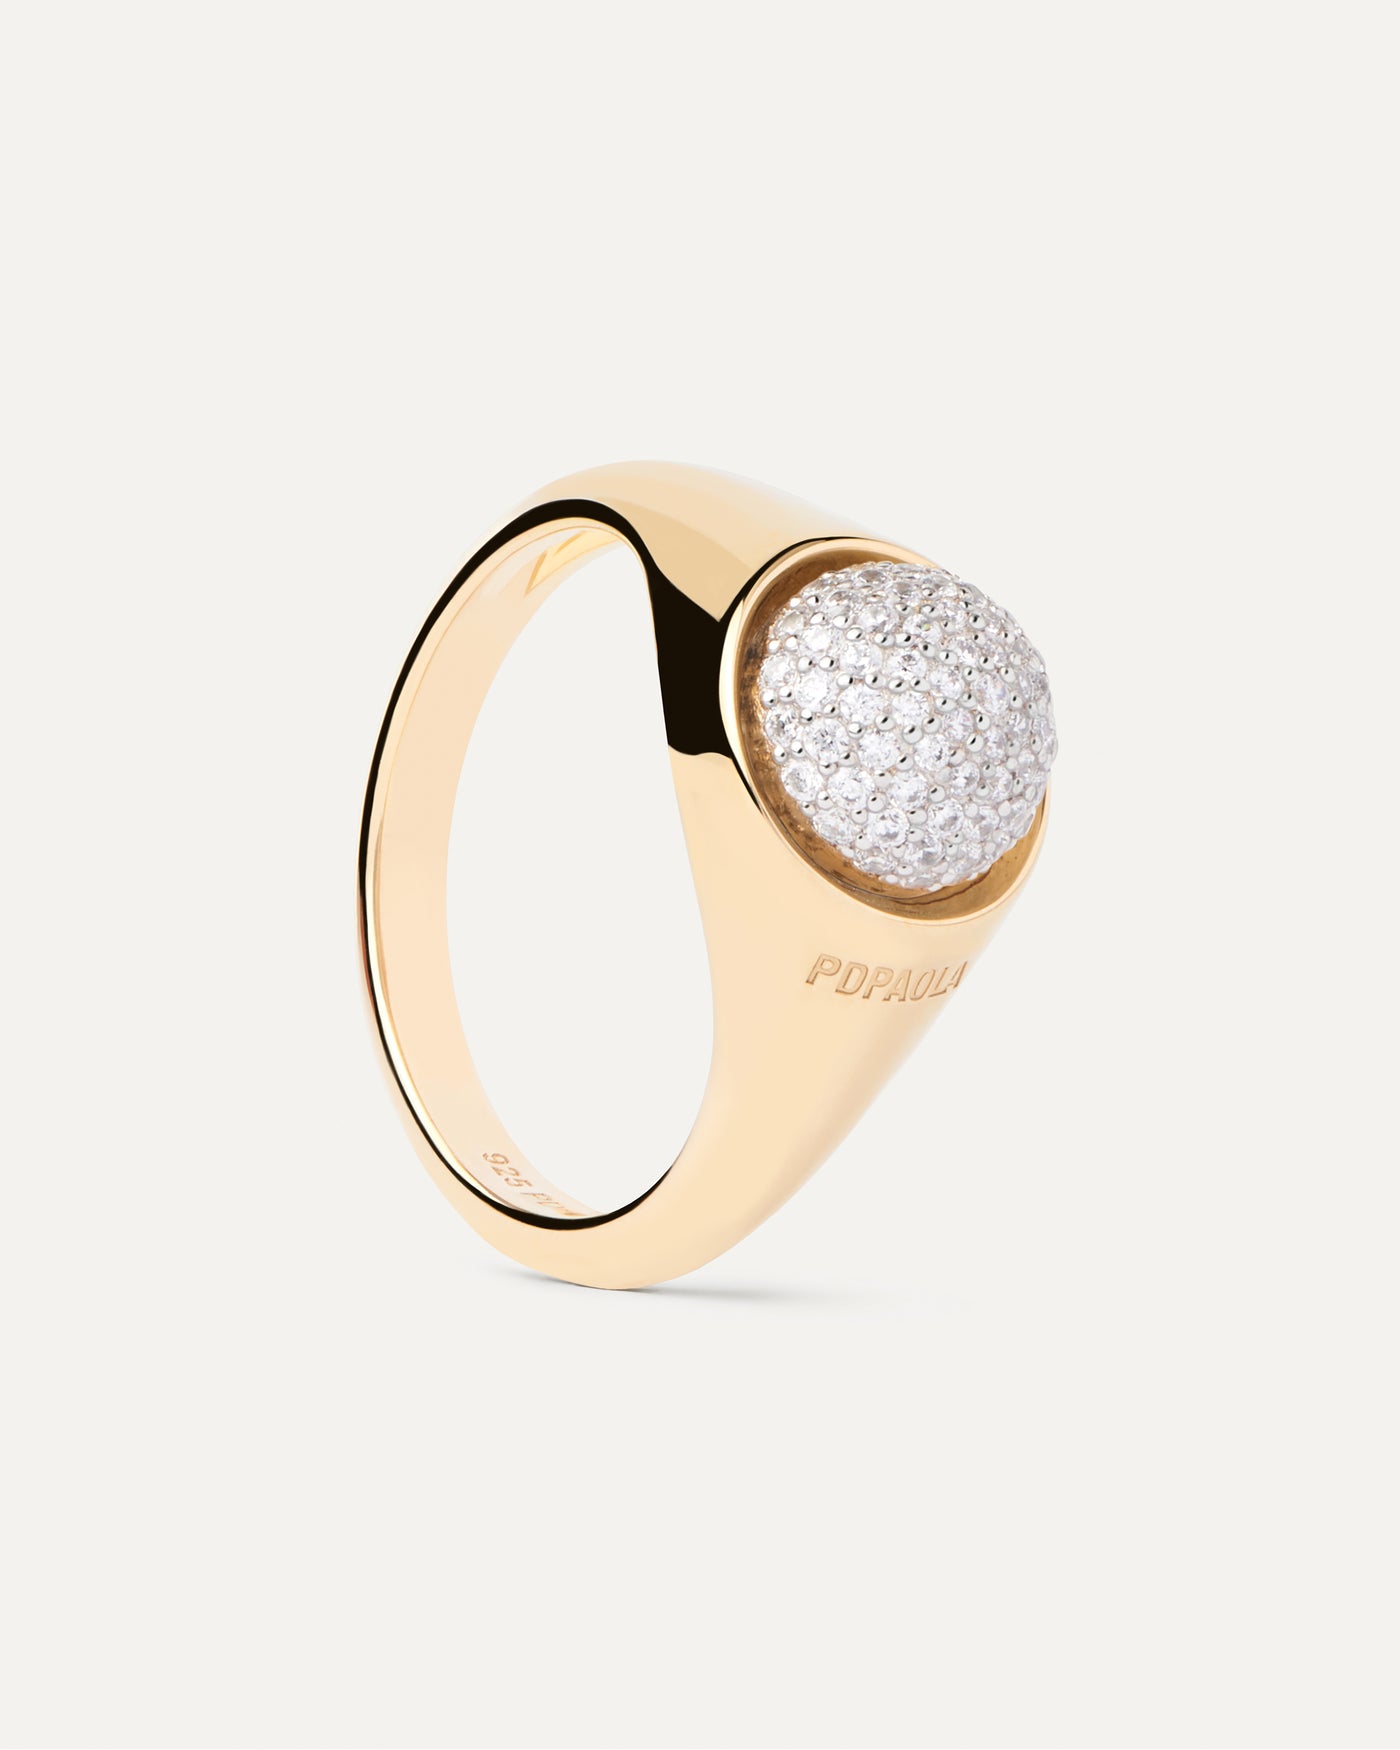 2023 Selection | Pavé Moon Ring. Get the latest arrival from PDPAOLA. Place your order safely and get this Best Seller. Free Shipping.